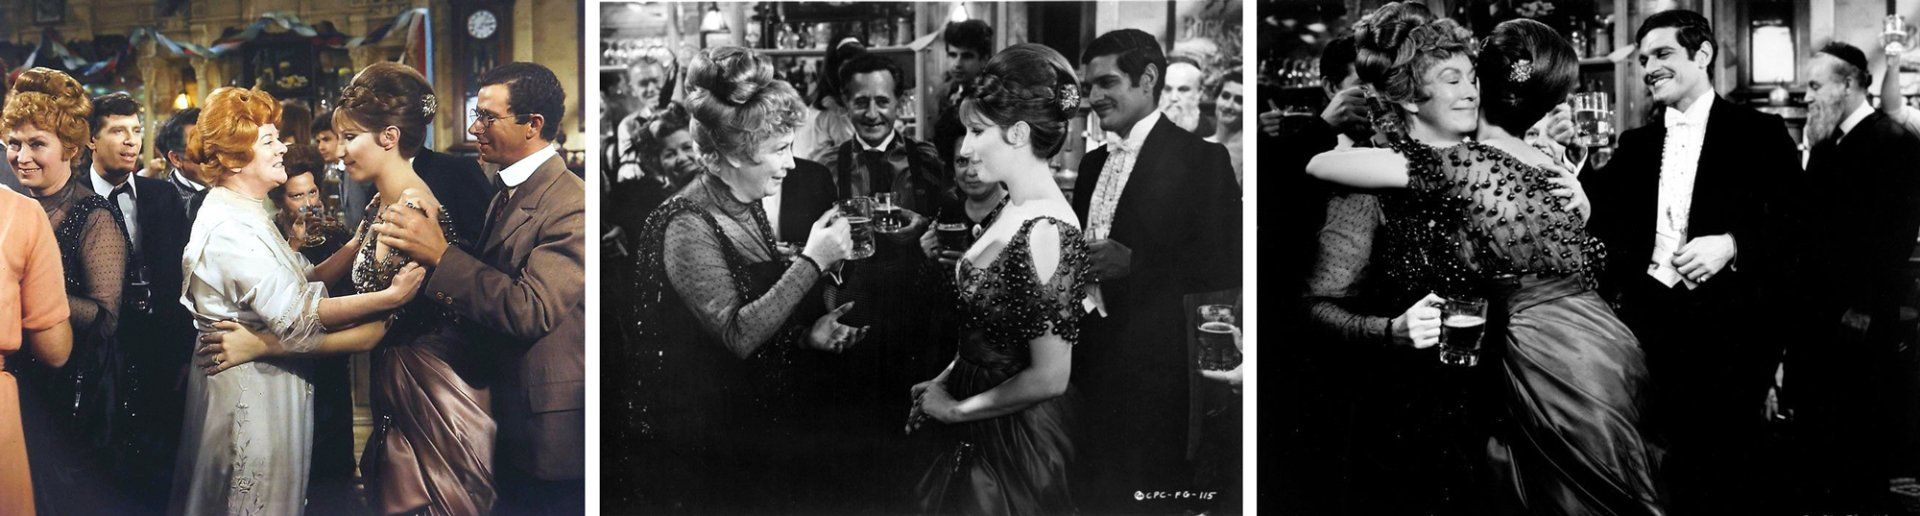 Three scenes from Mrs. Brice's party which were cut from the movie.